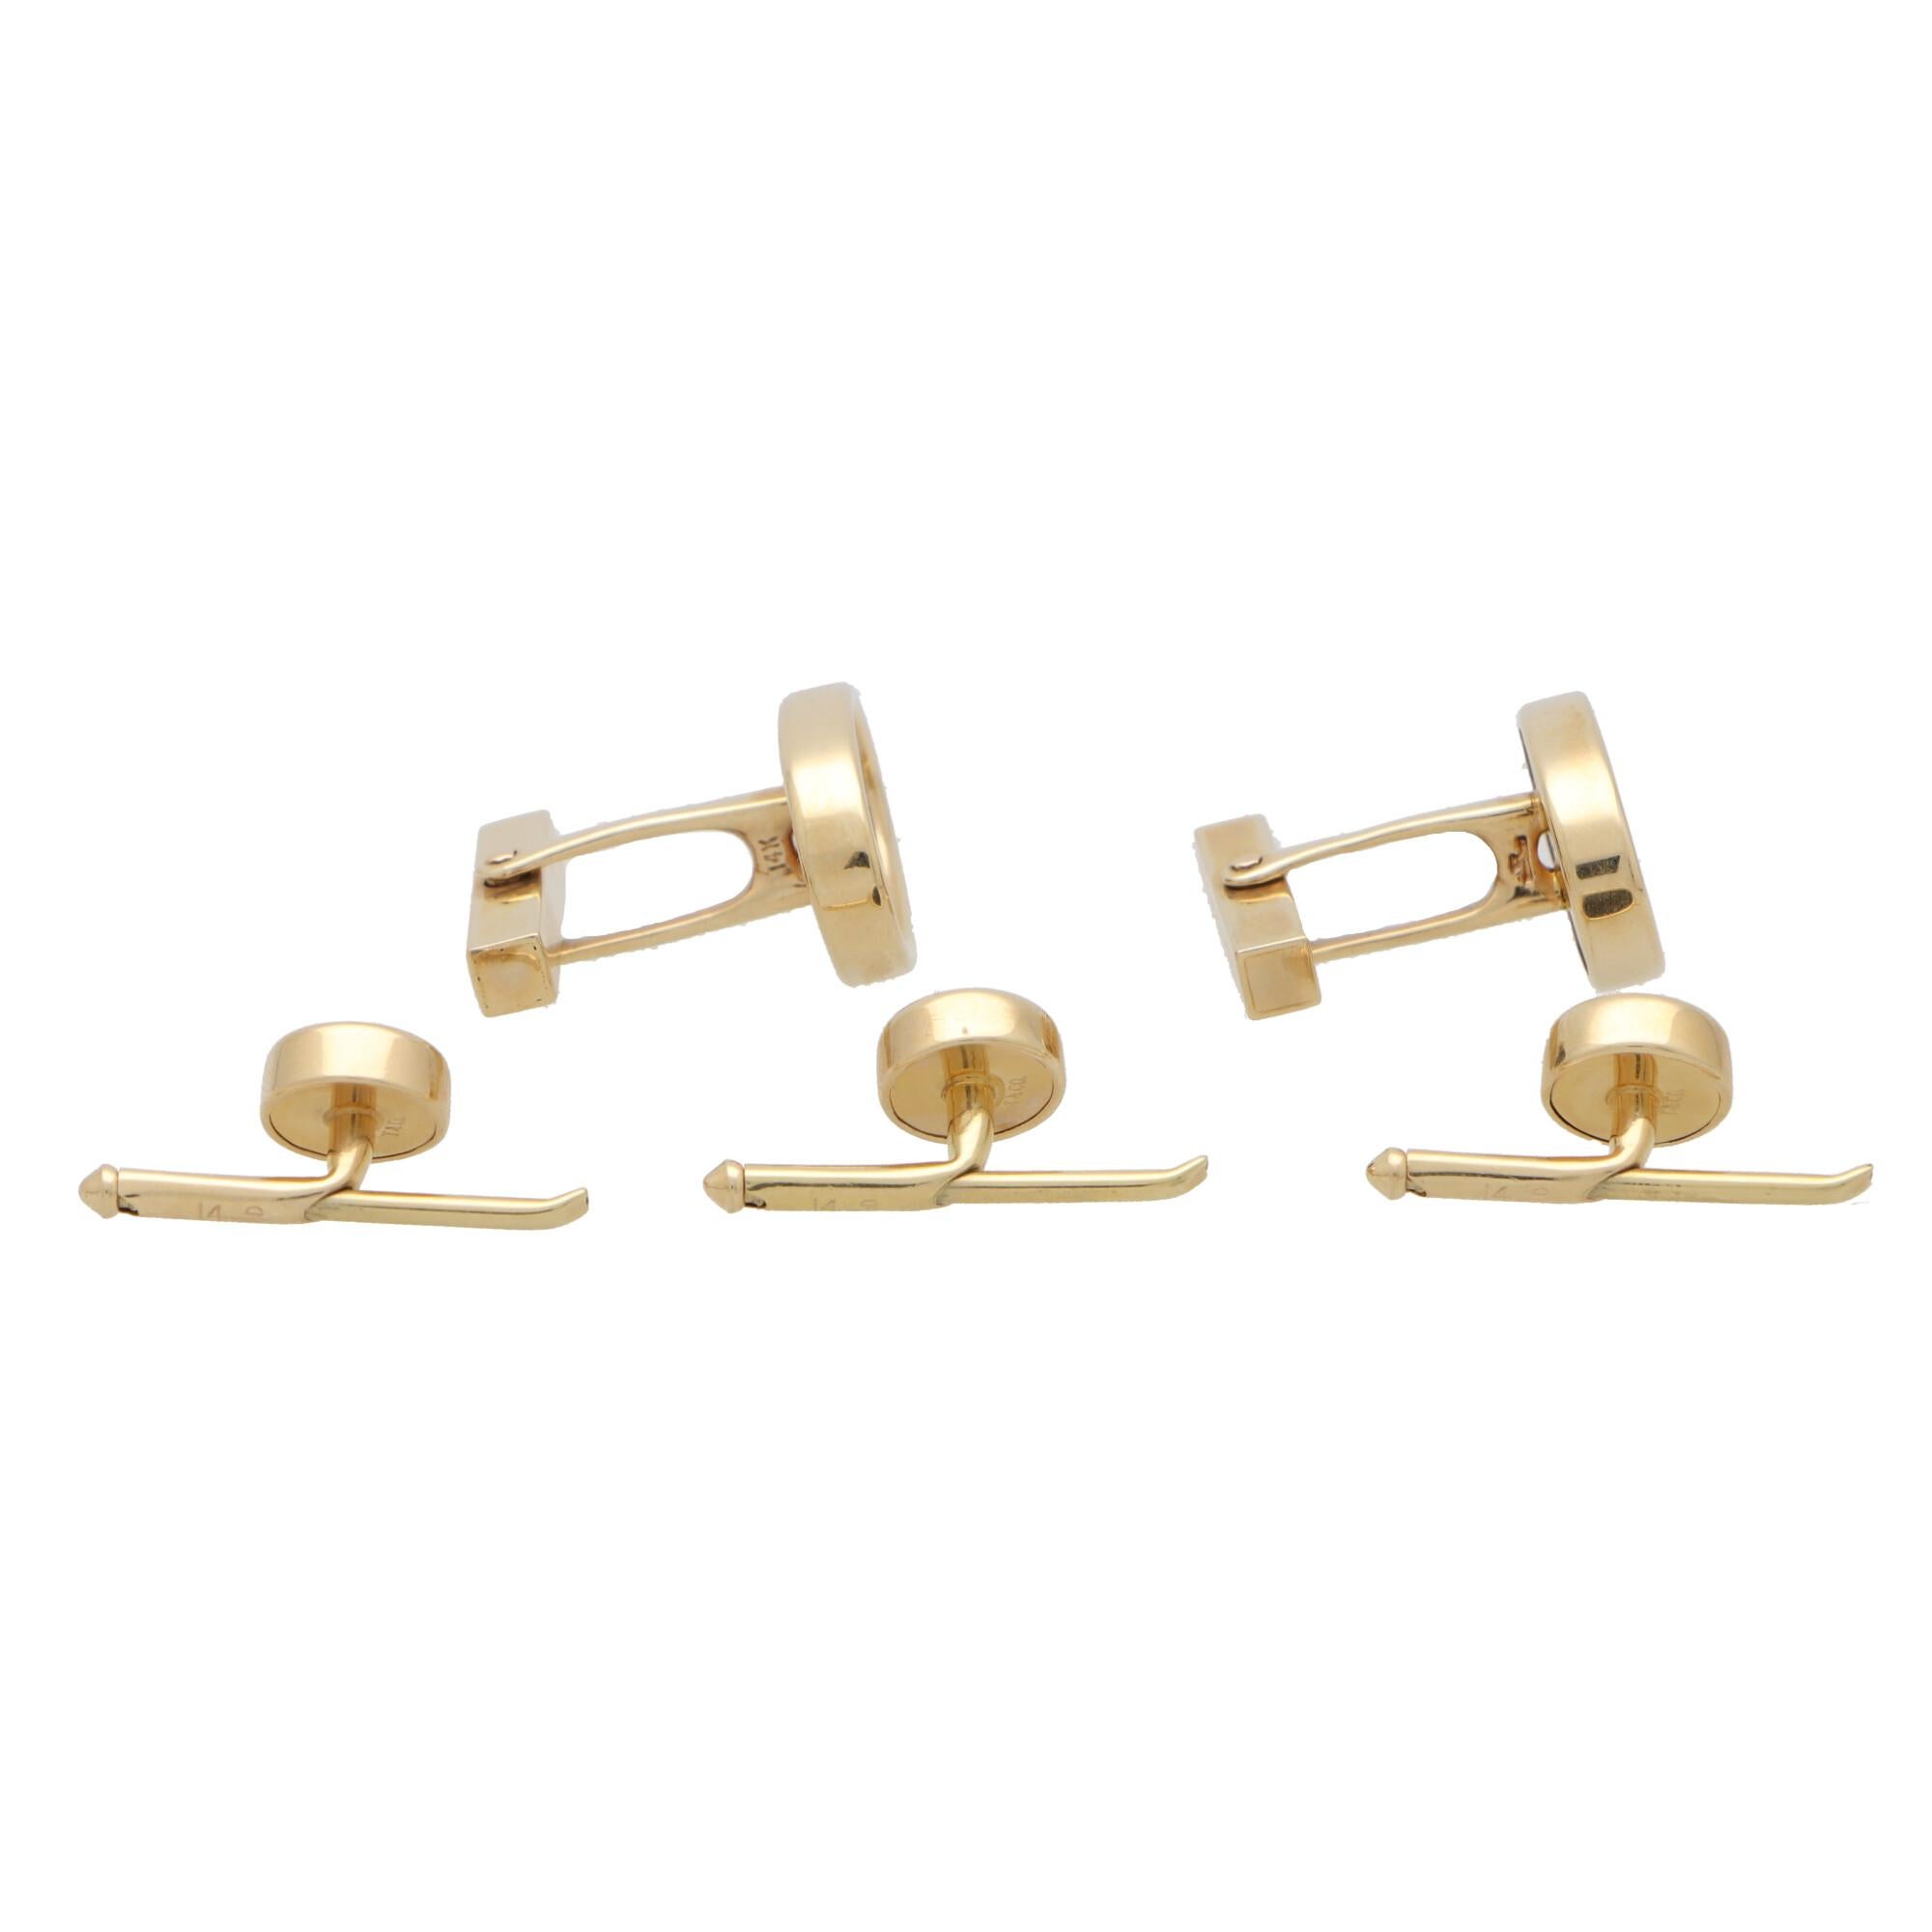 An extremely stylish vintage Tiffany & Co. cufflink and stud dress set in onyx and 14k yellow gold. 

The set is composed of a pair of oval swivel back cufflinks set centrally with an oval piece of jet-black onyx. The swivel back fittings allow the